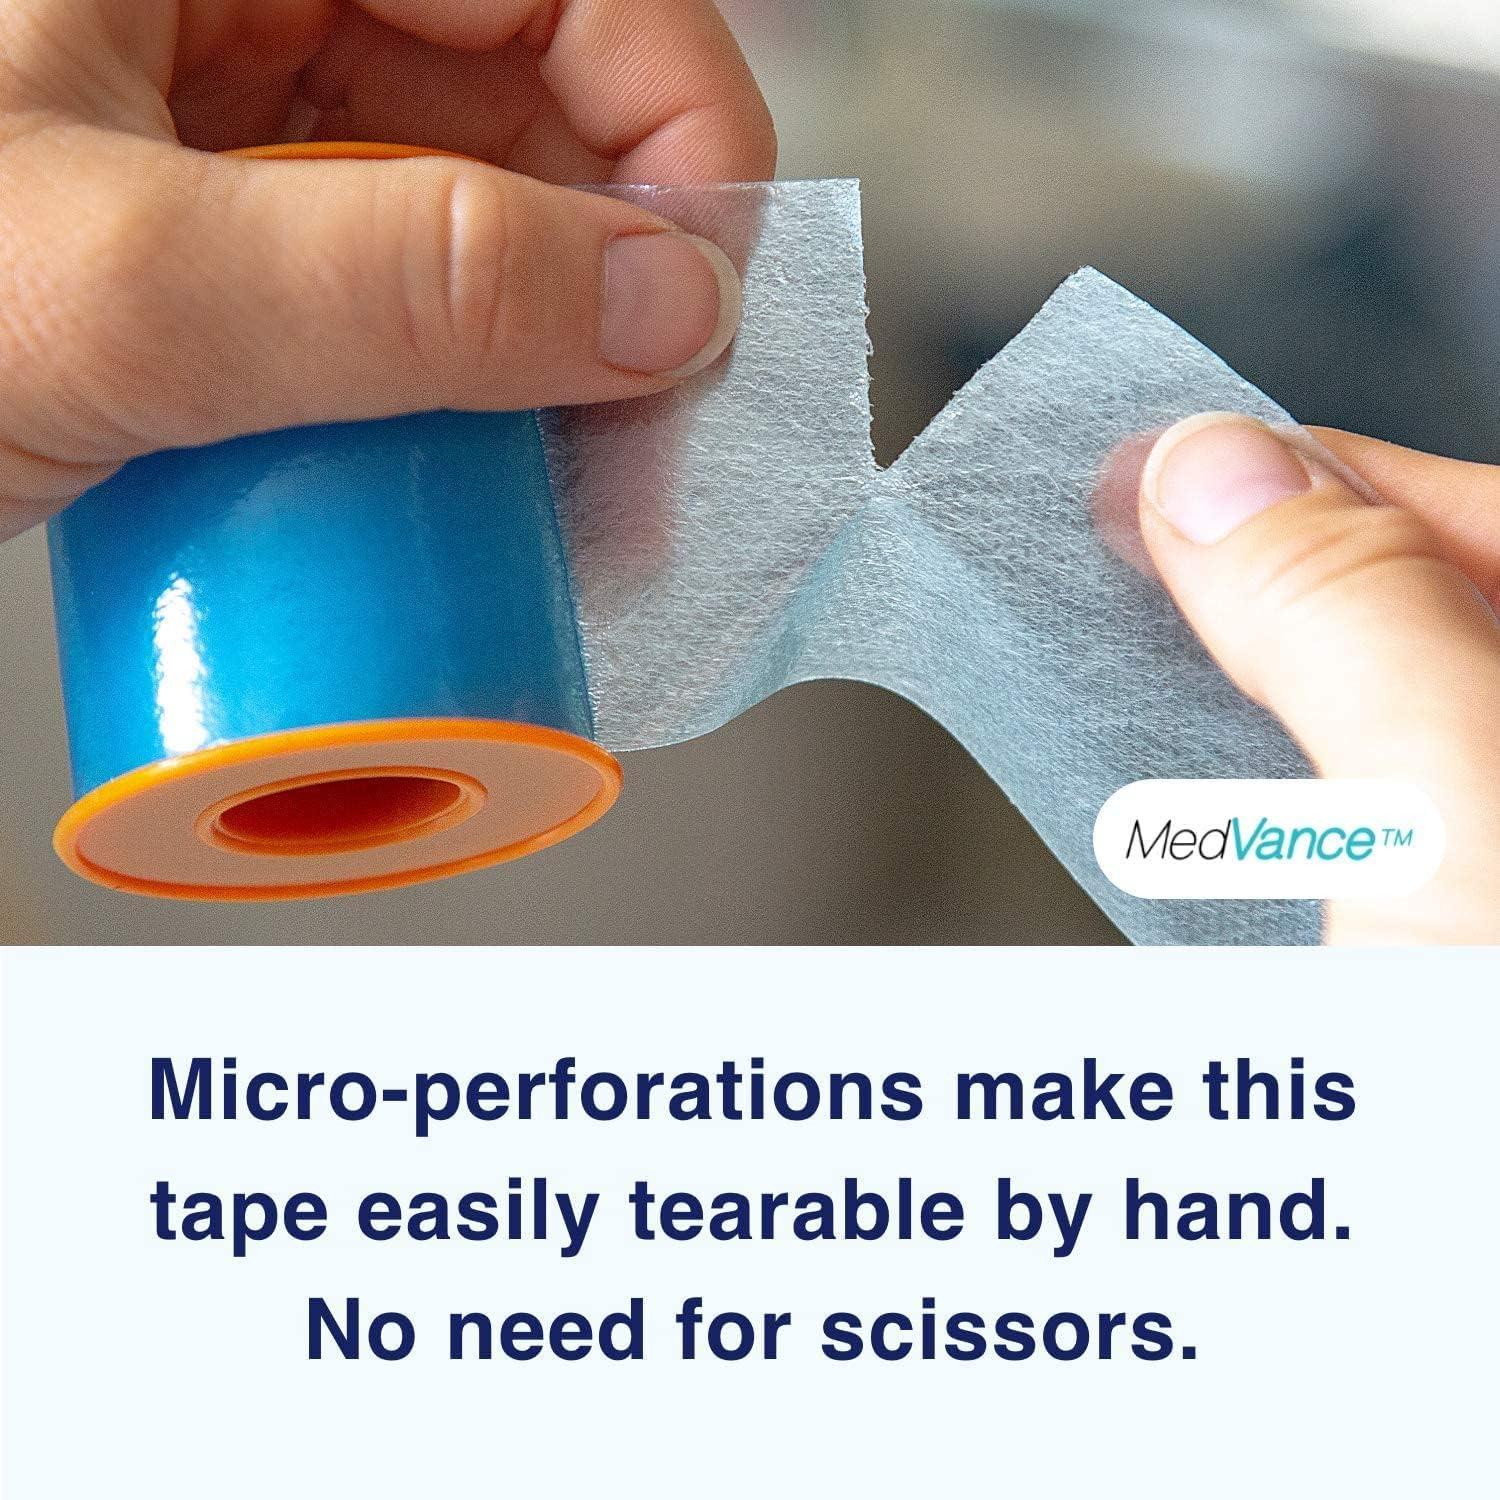  Medvance Soft Silicone Tape with Perforation for Easy